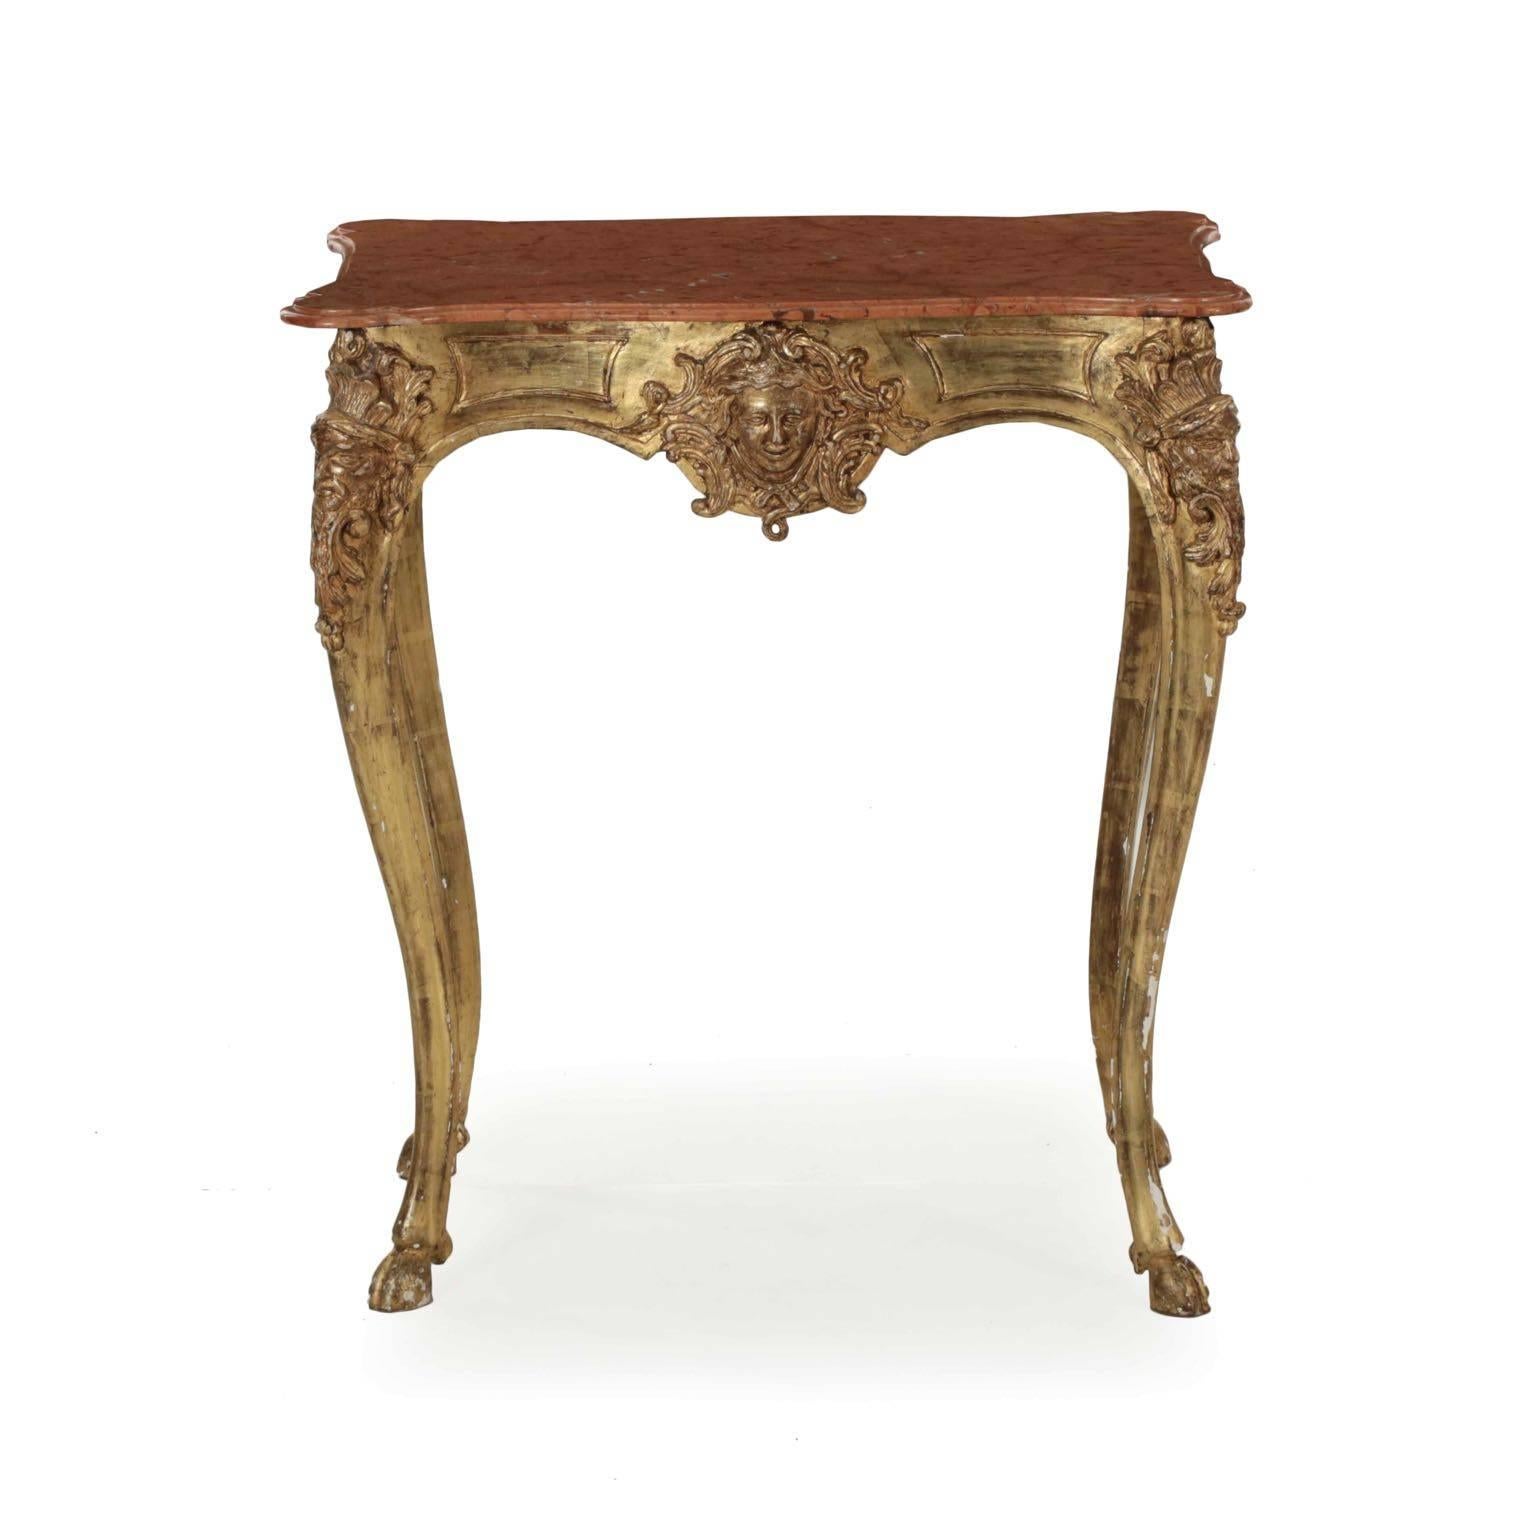 A whimsical piece full of movement and flowing curves, this superb little table has the feel and character of Italian Rococo, though it is a difficult form on which to narrow down origin. Crafted around the middle of the 19th century, the table is